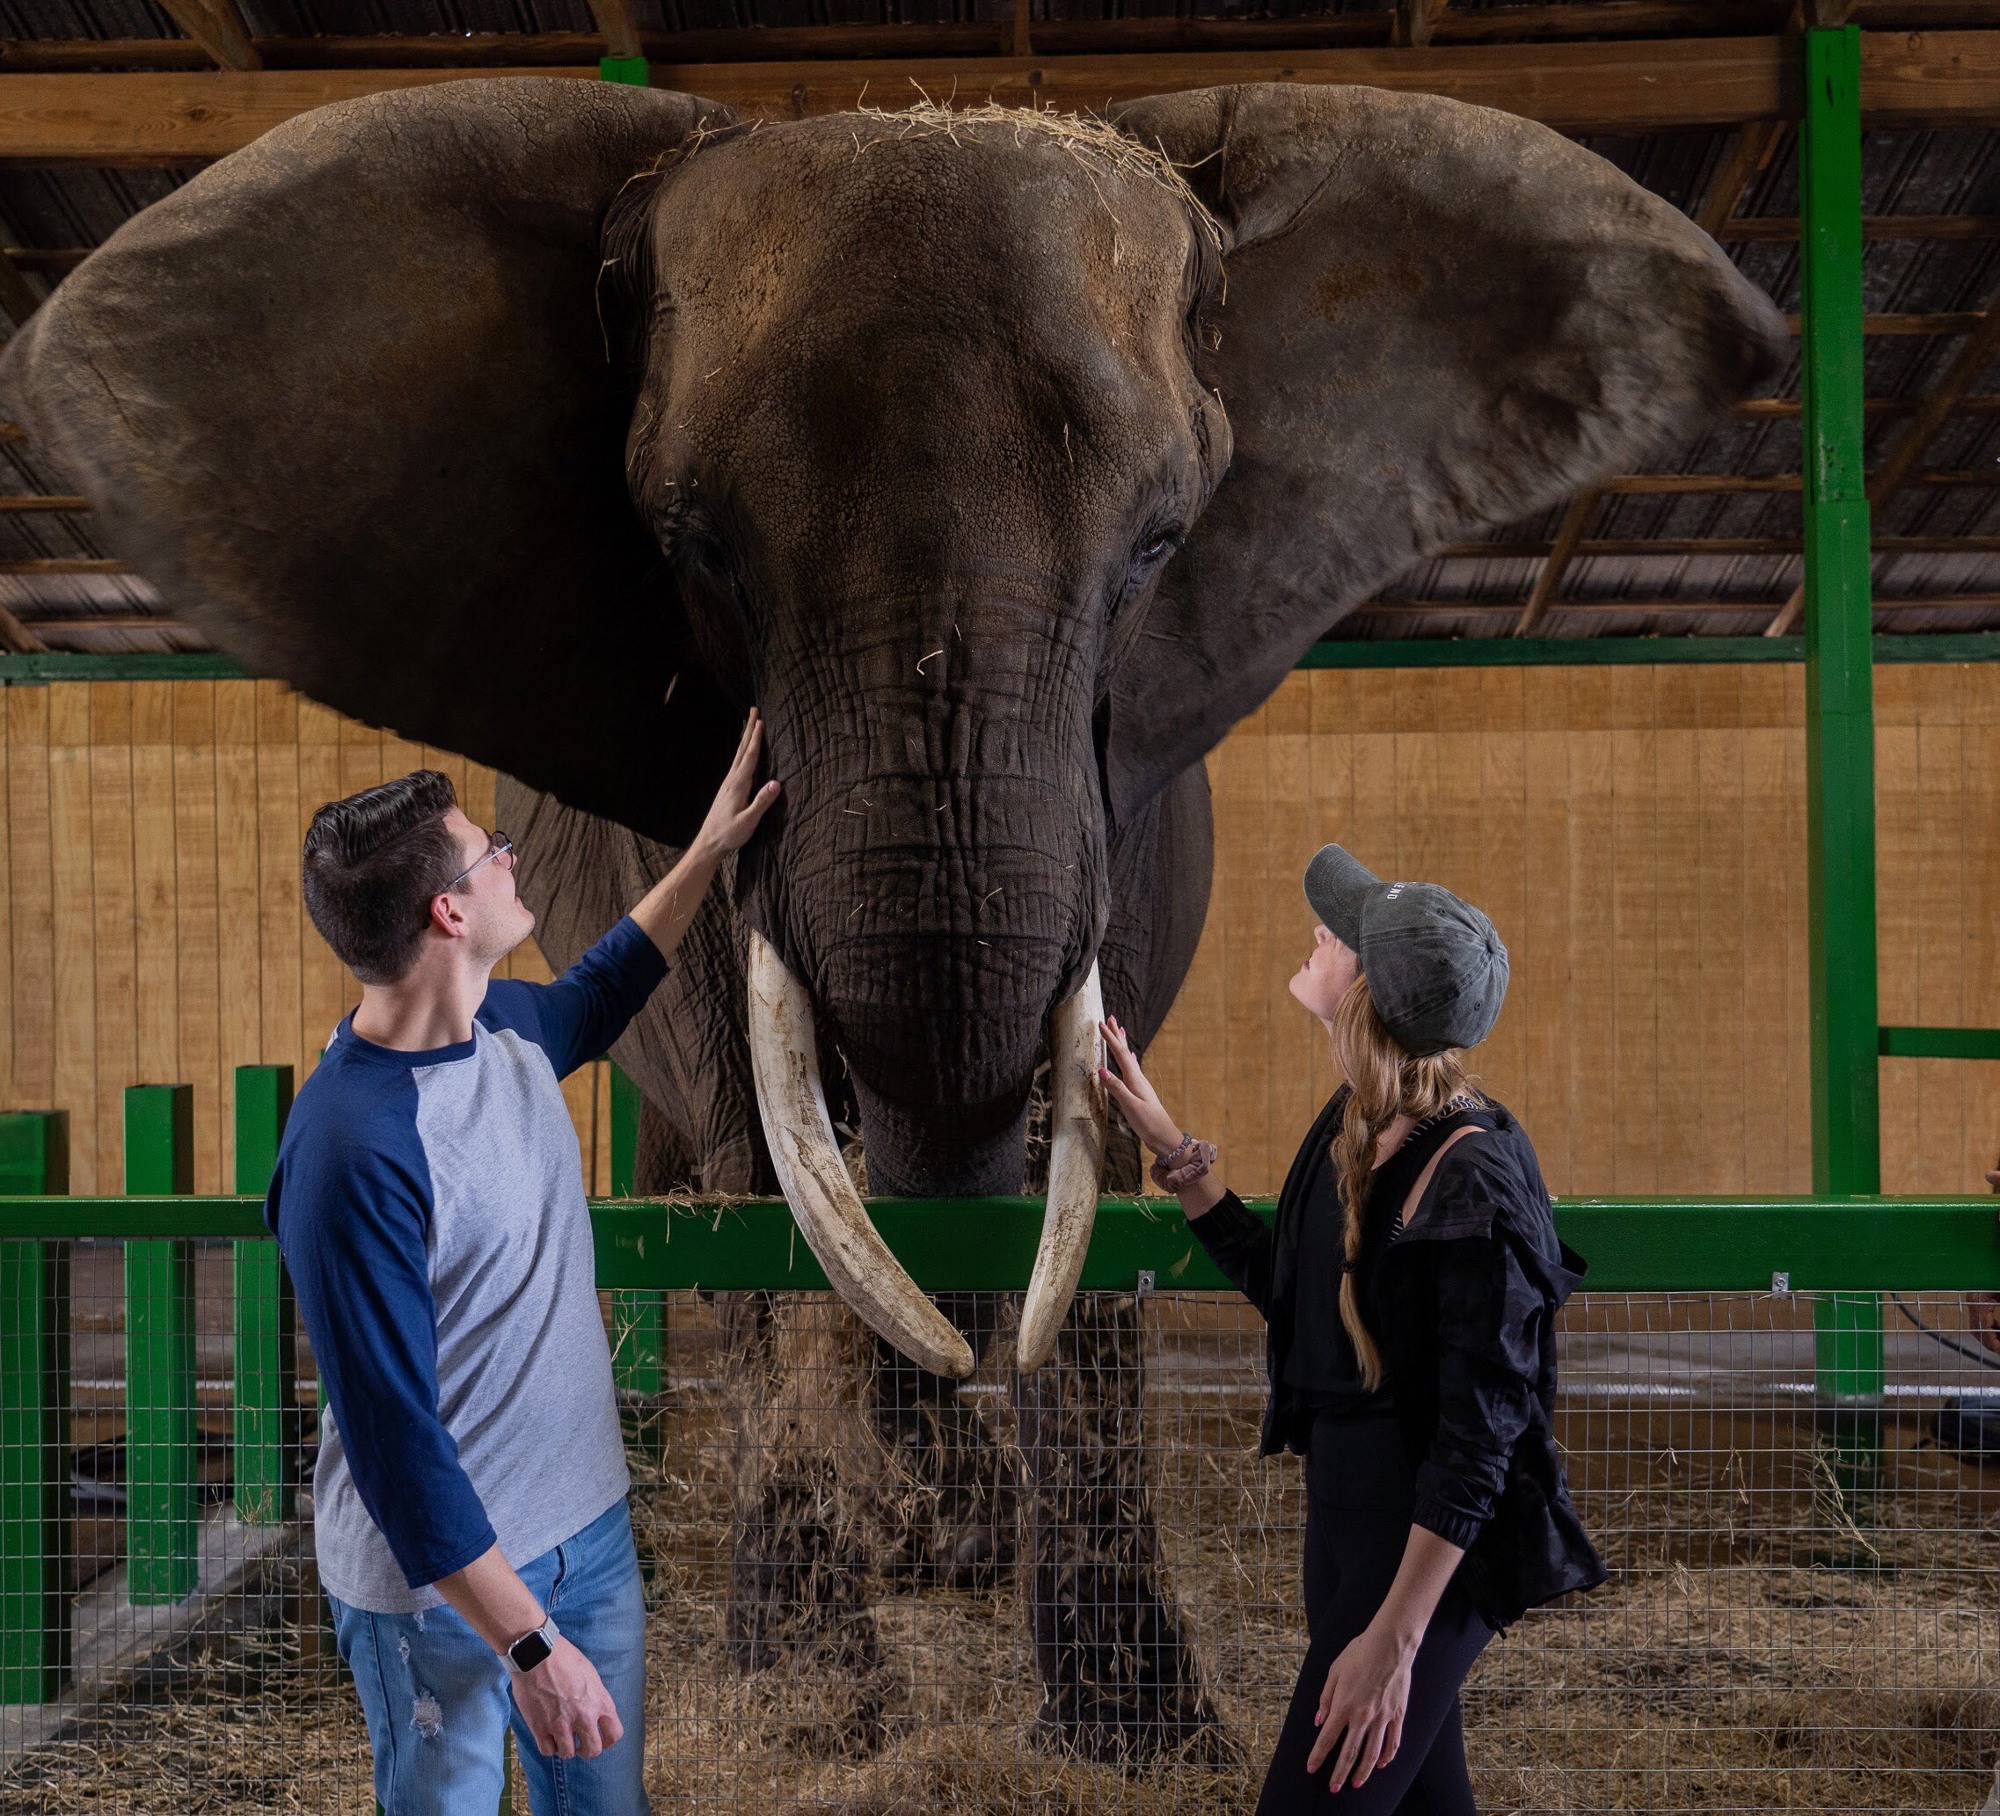 Myakka Elephant Ranch visitors MacGregor Monroe and Alea Dellecave enjoy interacting with one of the elephants on the ranch. Courtesy photo.